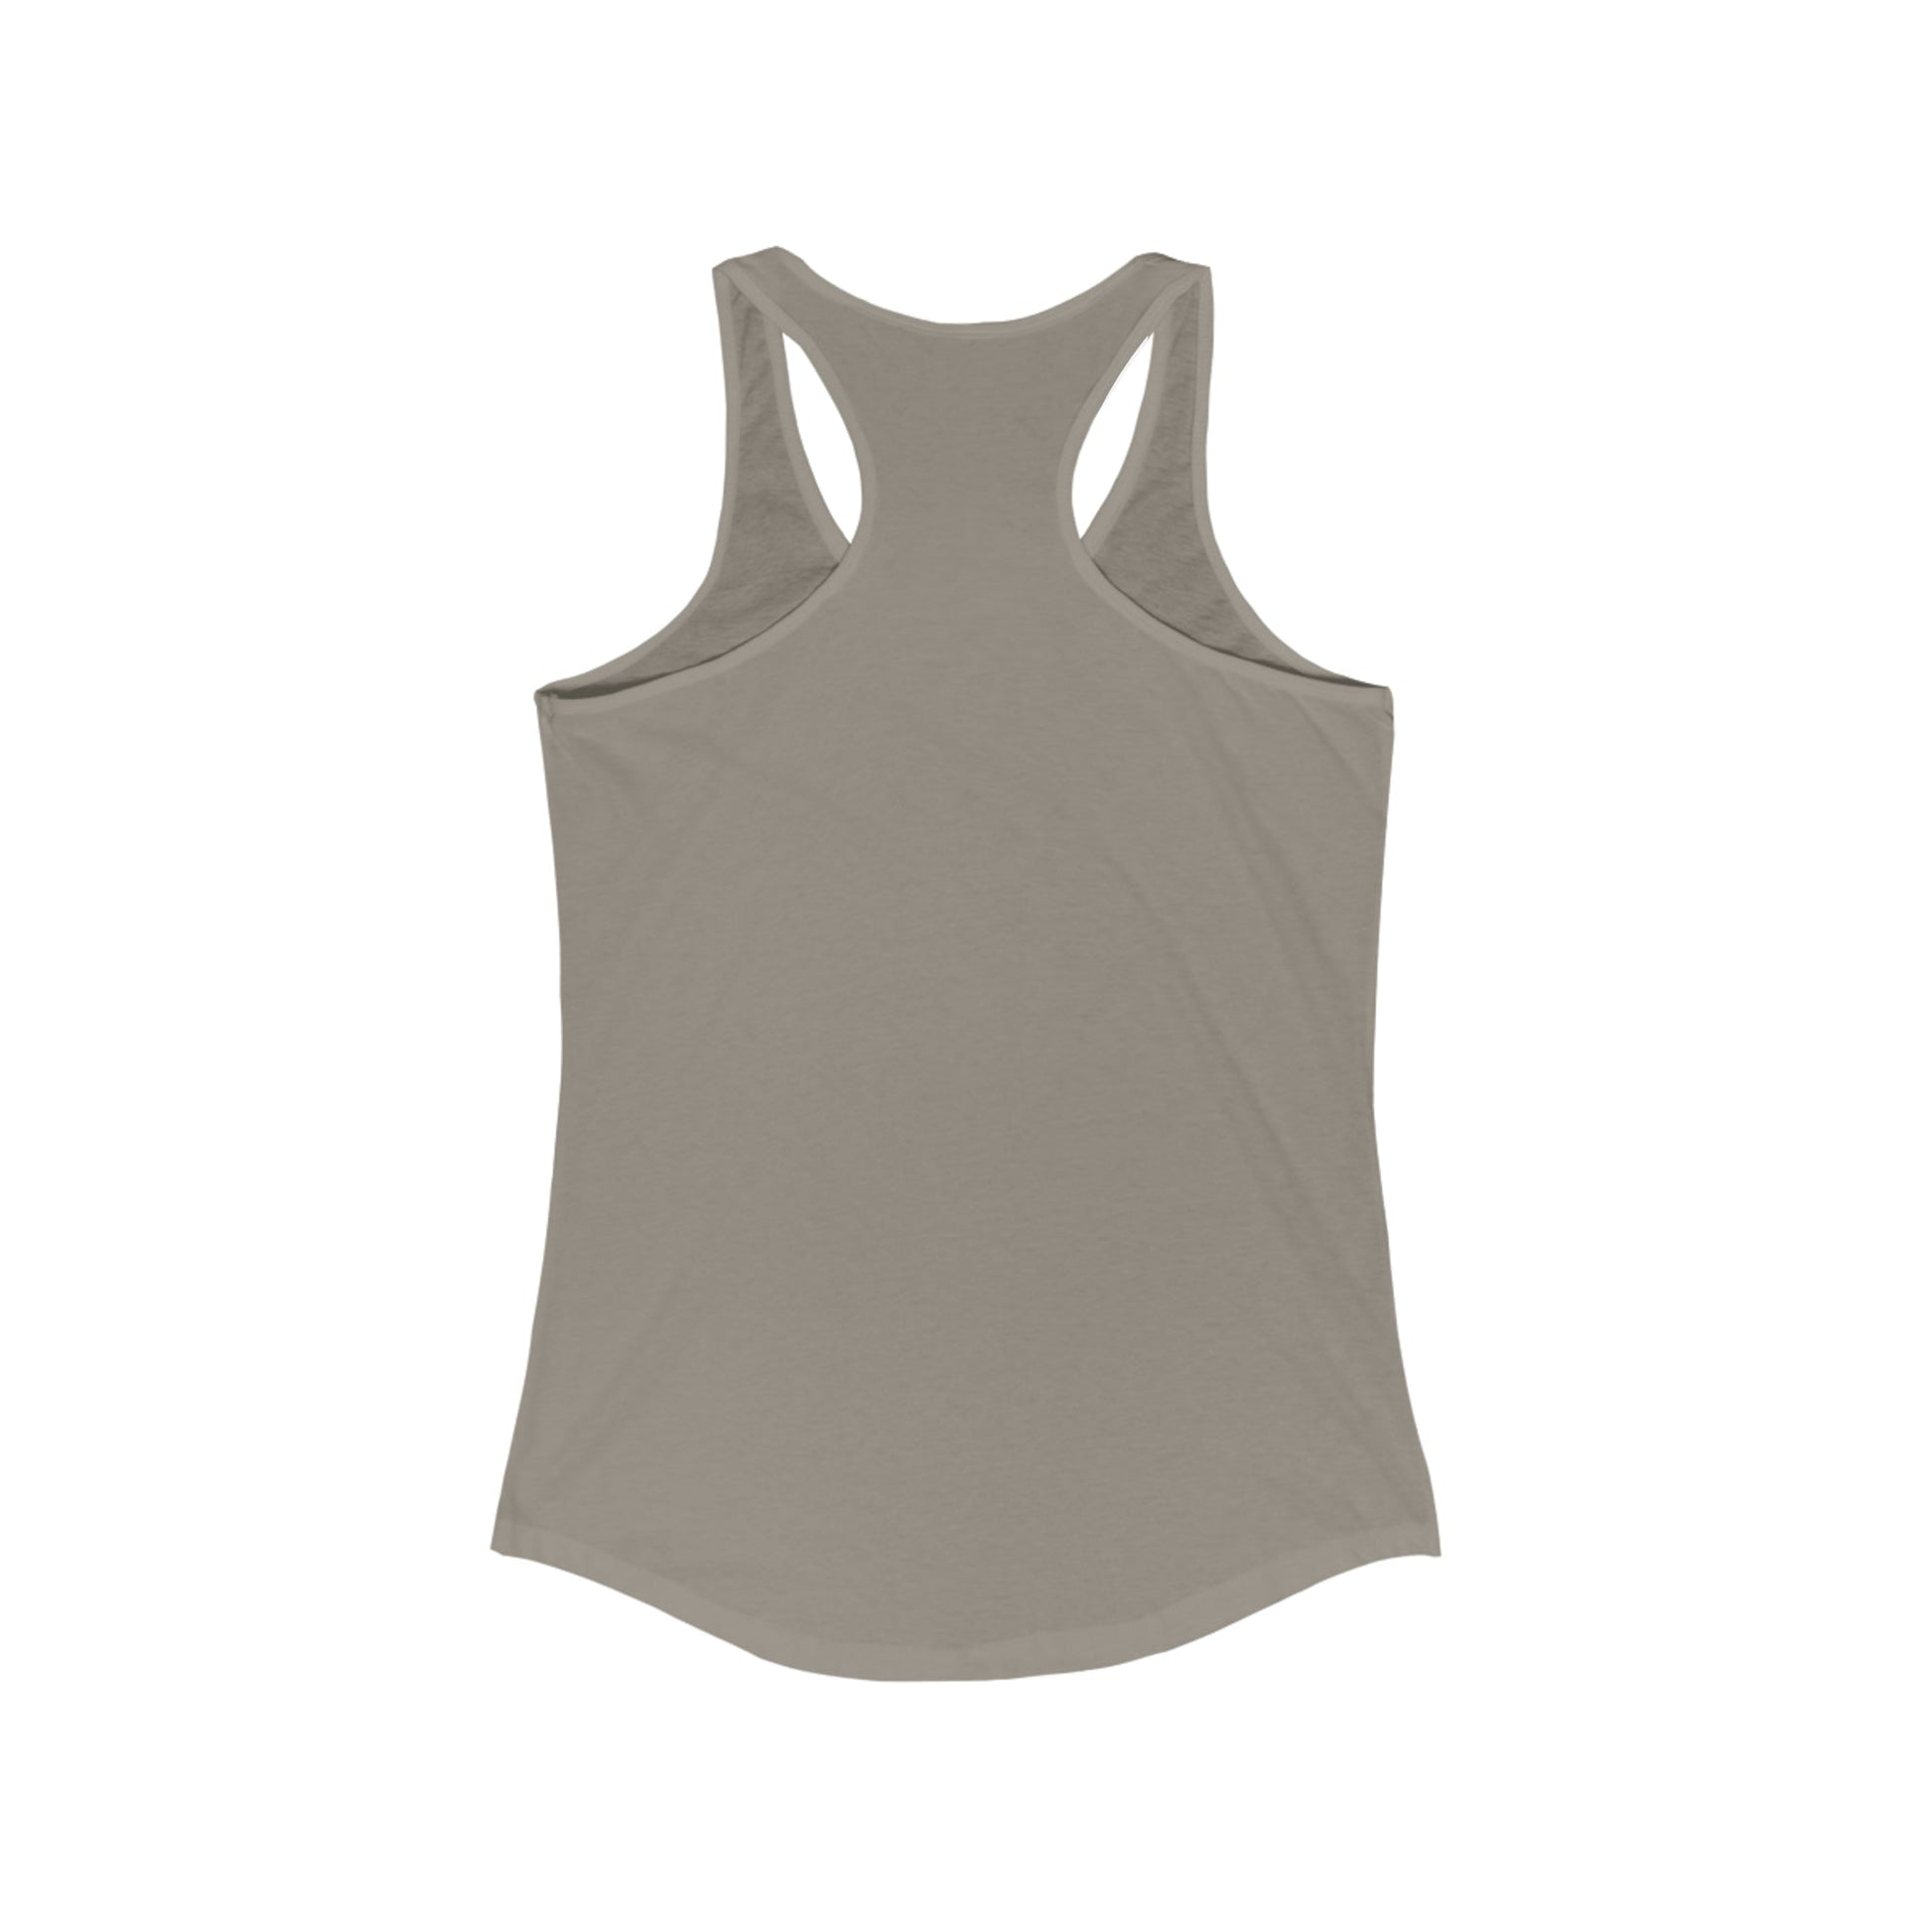 I've Replaced All My Blood With Coffee Women's Ideal Racerback Tank